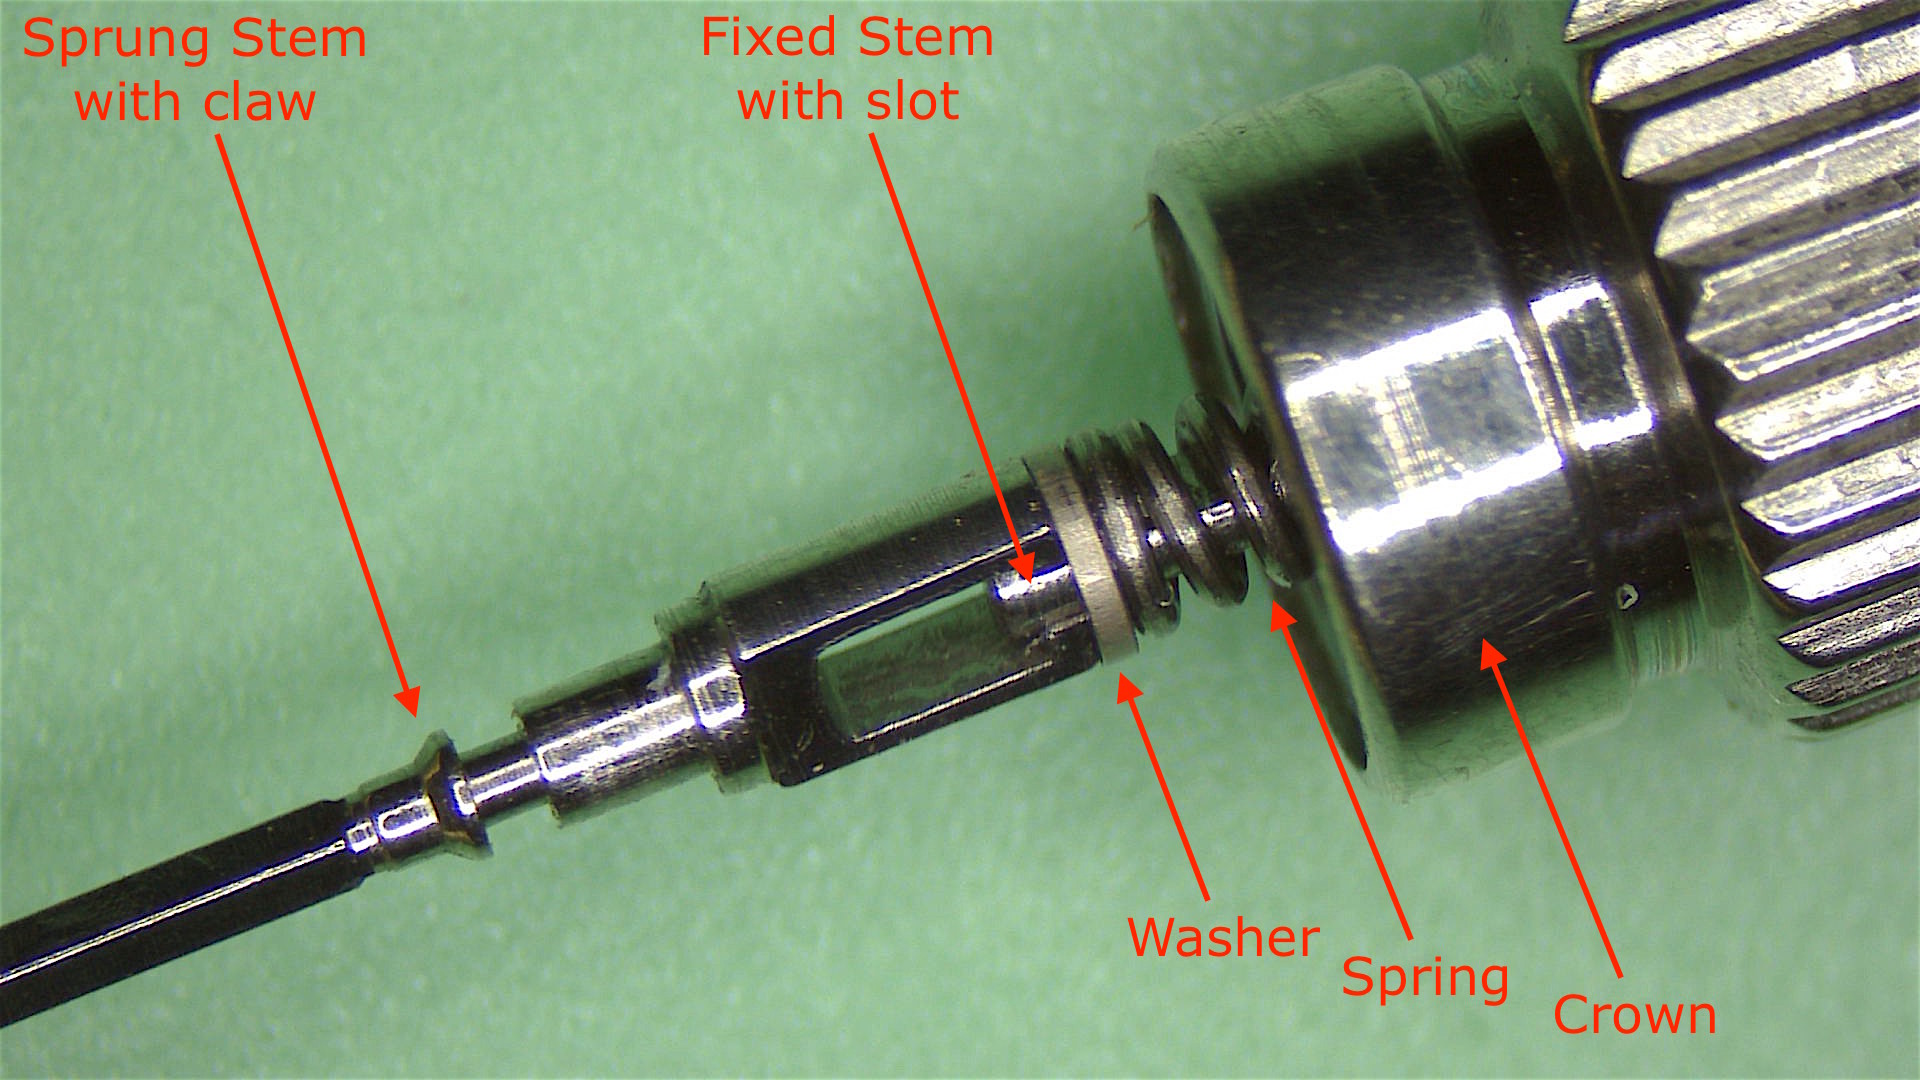 On My Bench - Seiko Stem Disassembly Tool - and other stuff | Omega Forums